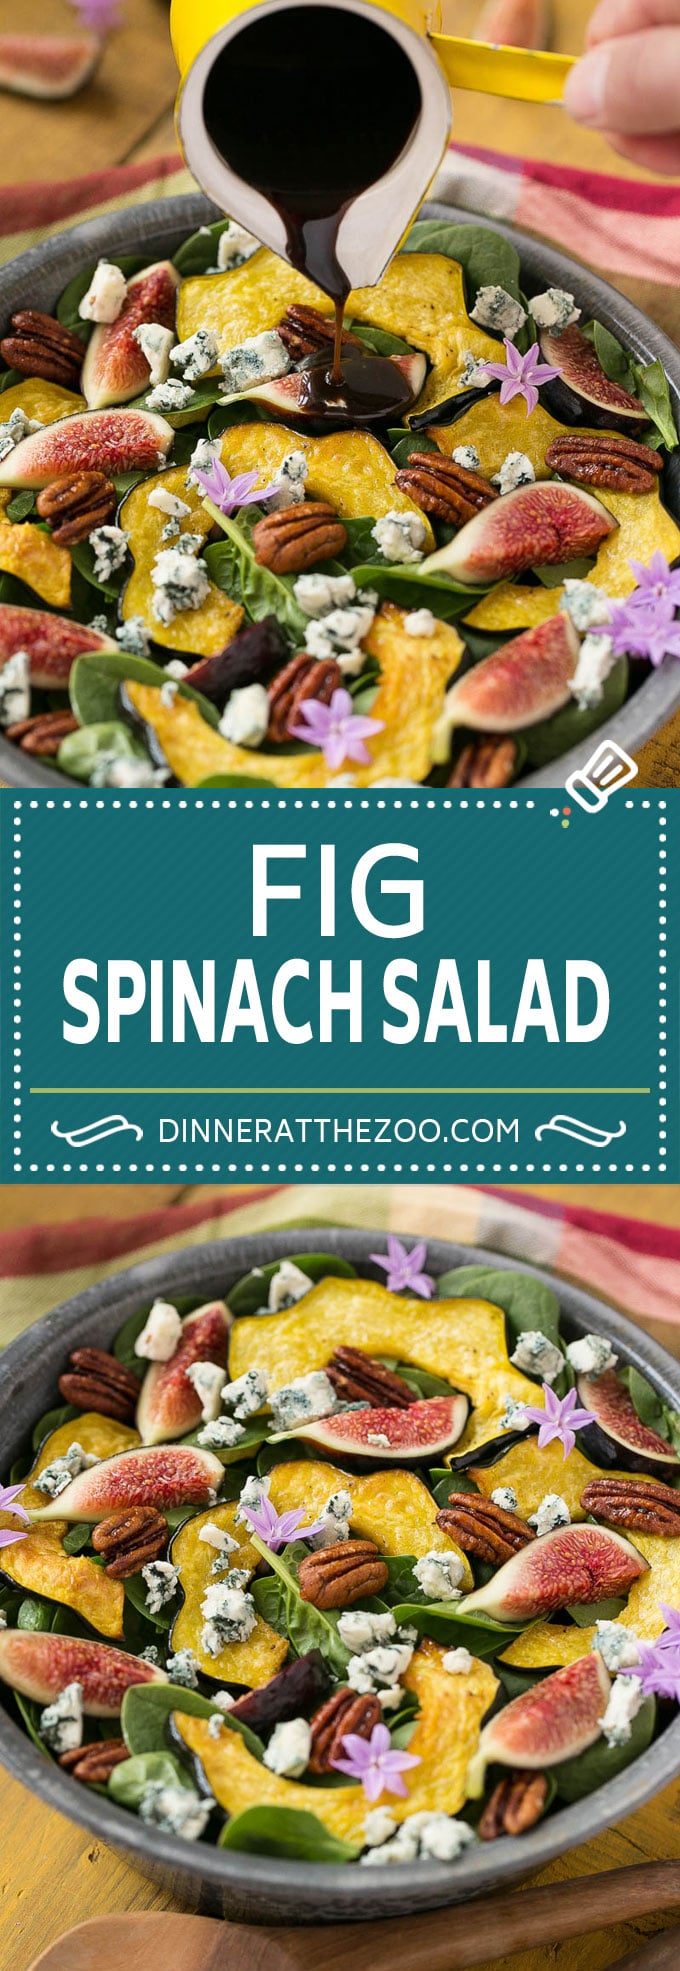 Fig Salad | Spinach Salad #salad #figs #dinner #spinach #dinneratthezoo